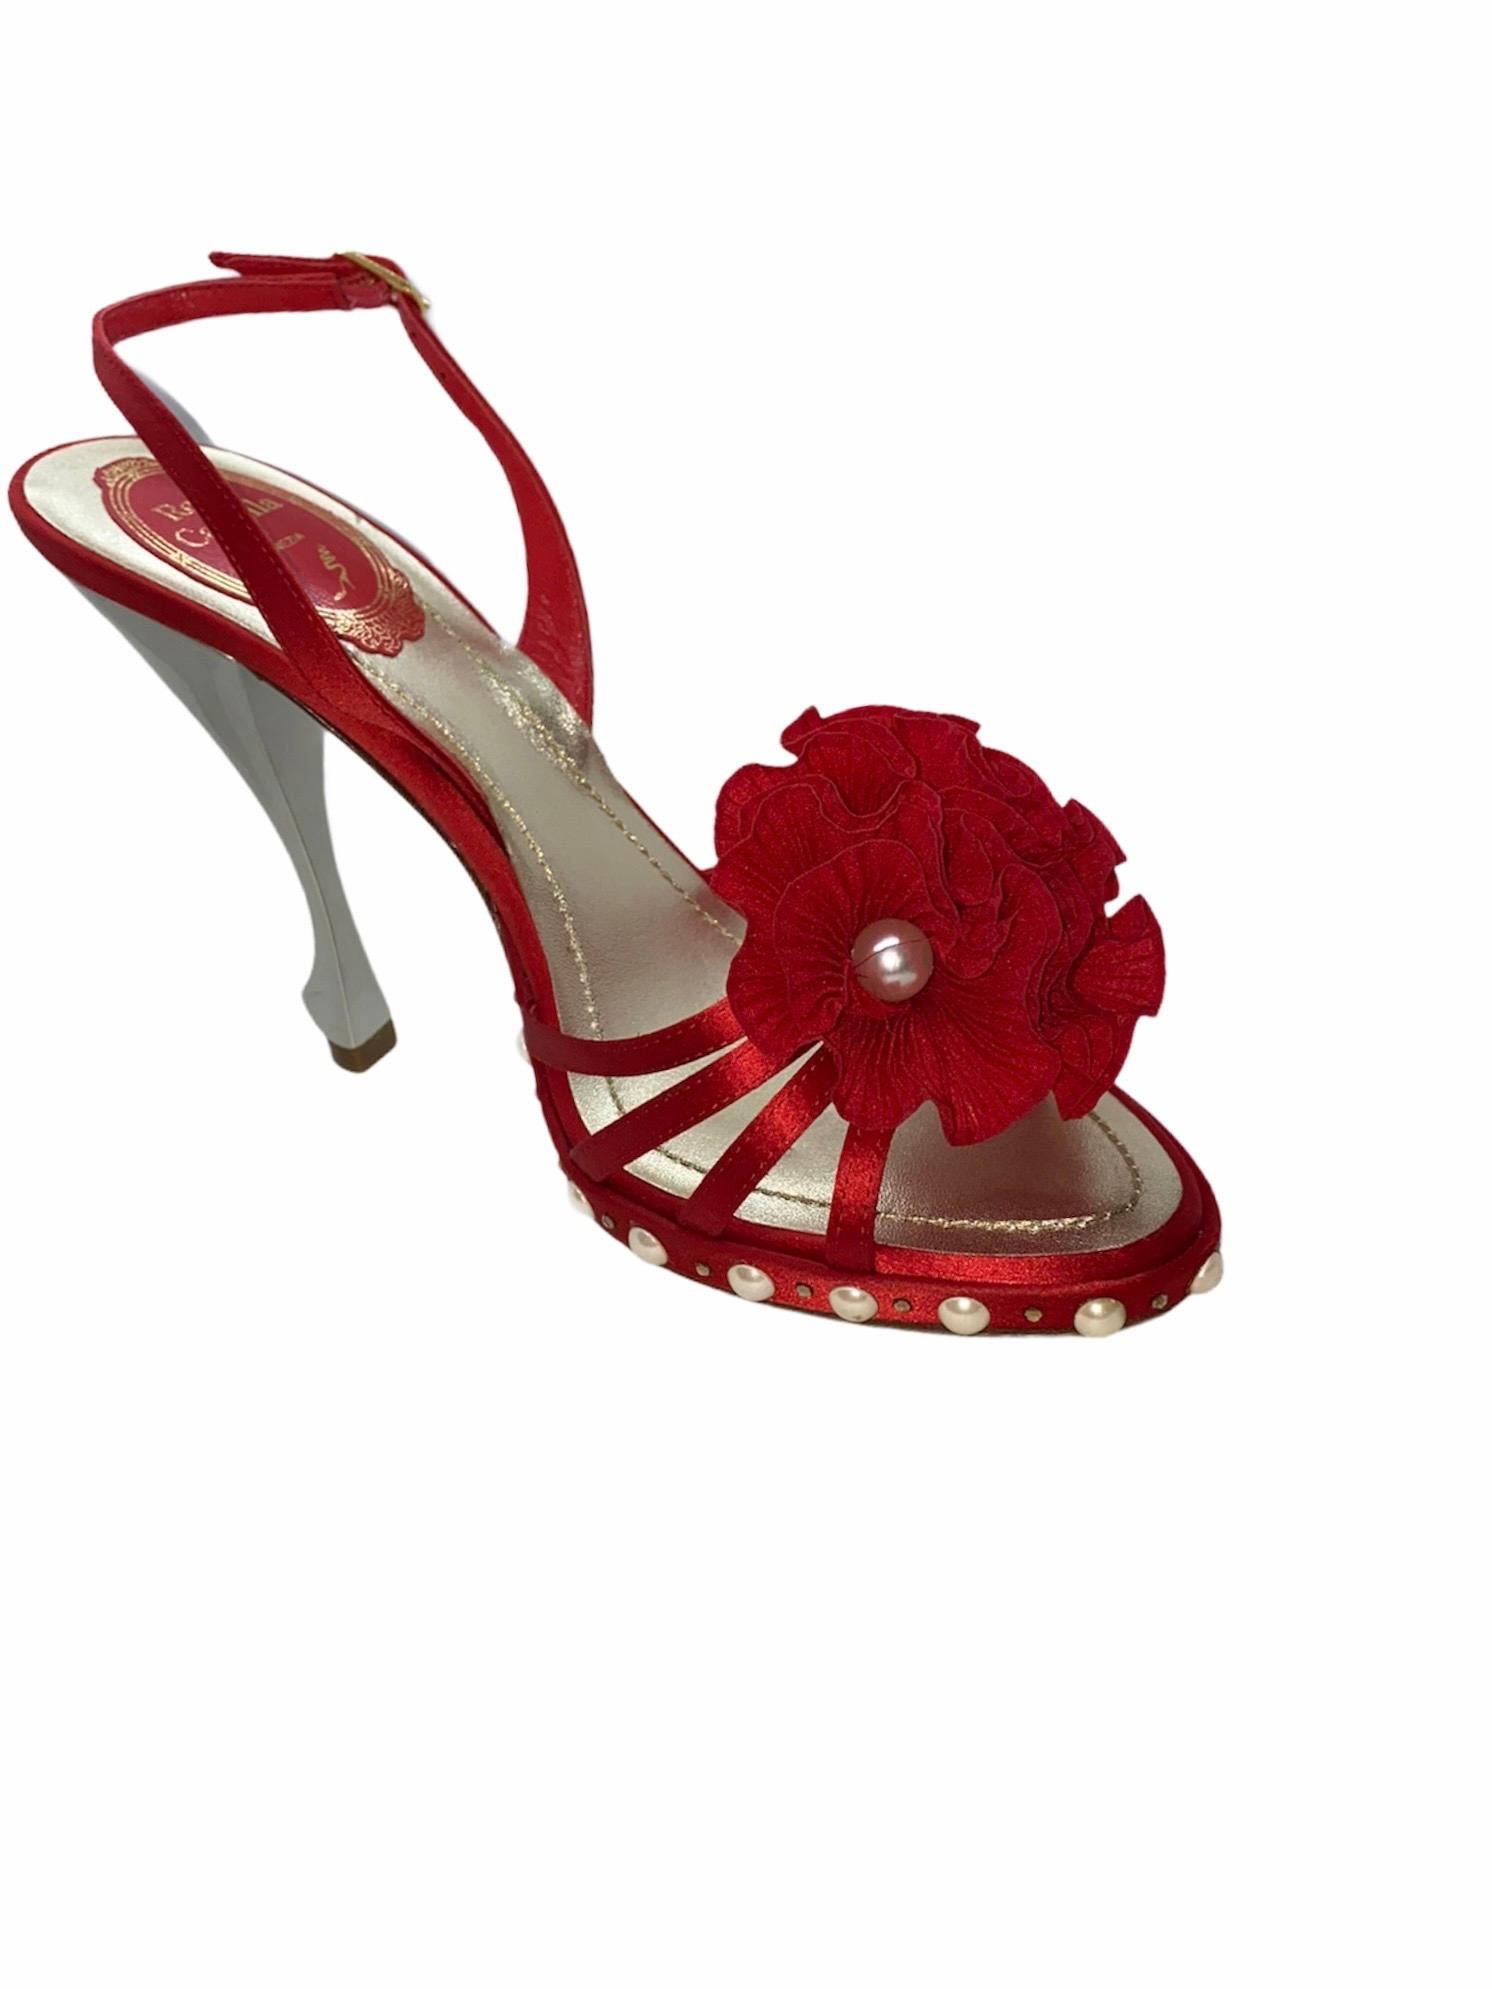 NEW René Caovilla Floral Flower High Heel Sandals with Faux Pearl Trimmings 38 For Sale 1